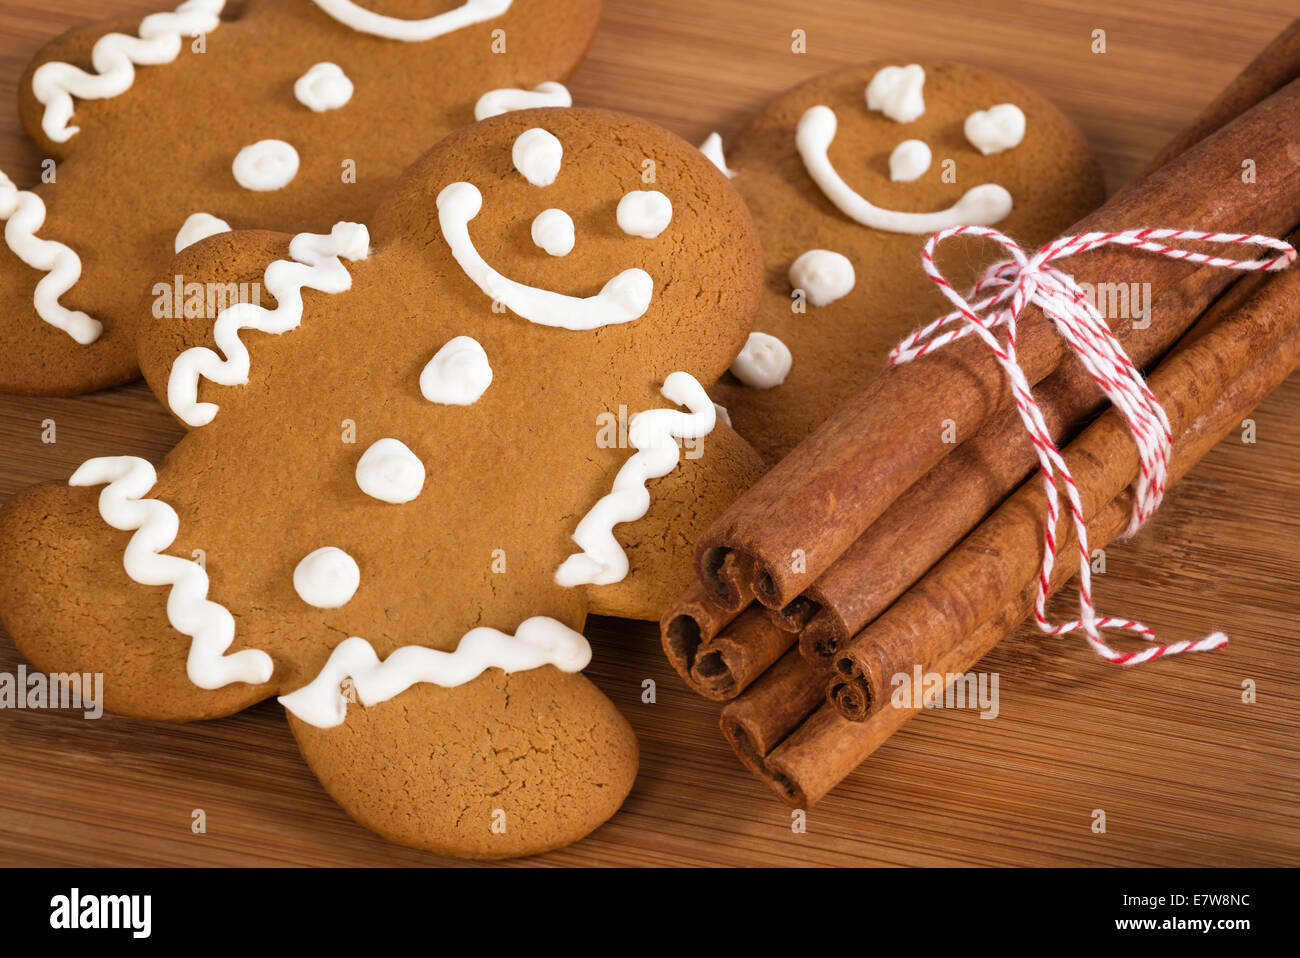 Freshly baked gingerbread man cookies with cinnamon sticks on wooden cutting board Stock Photo